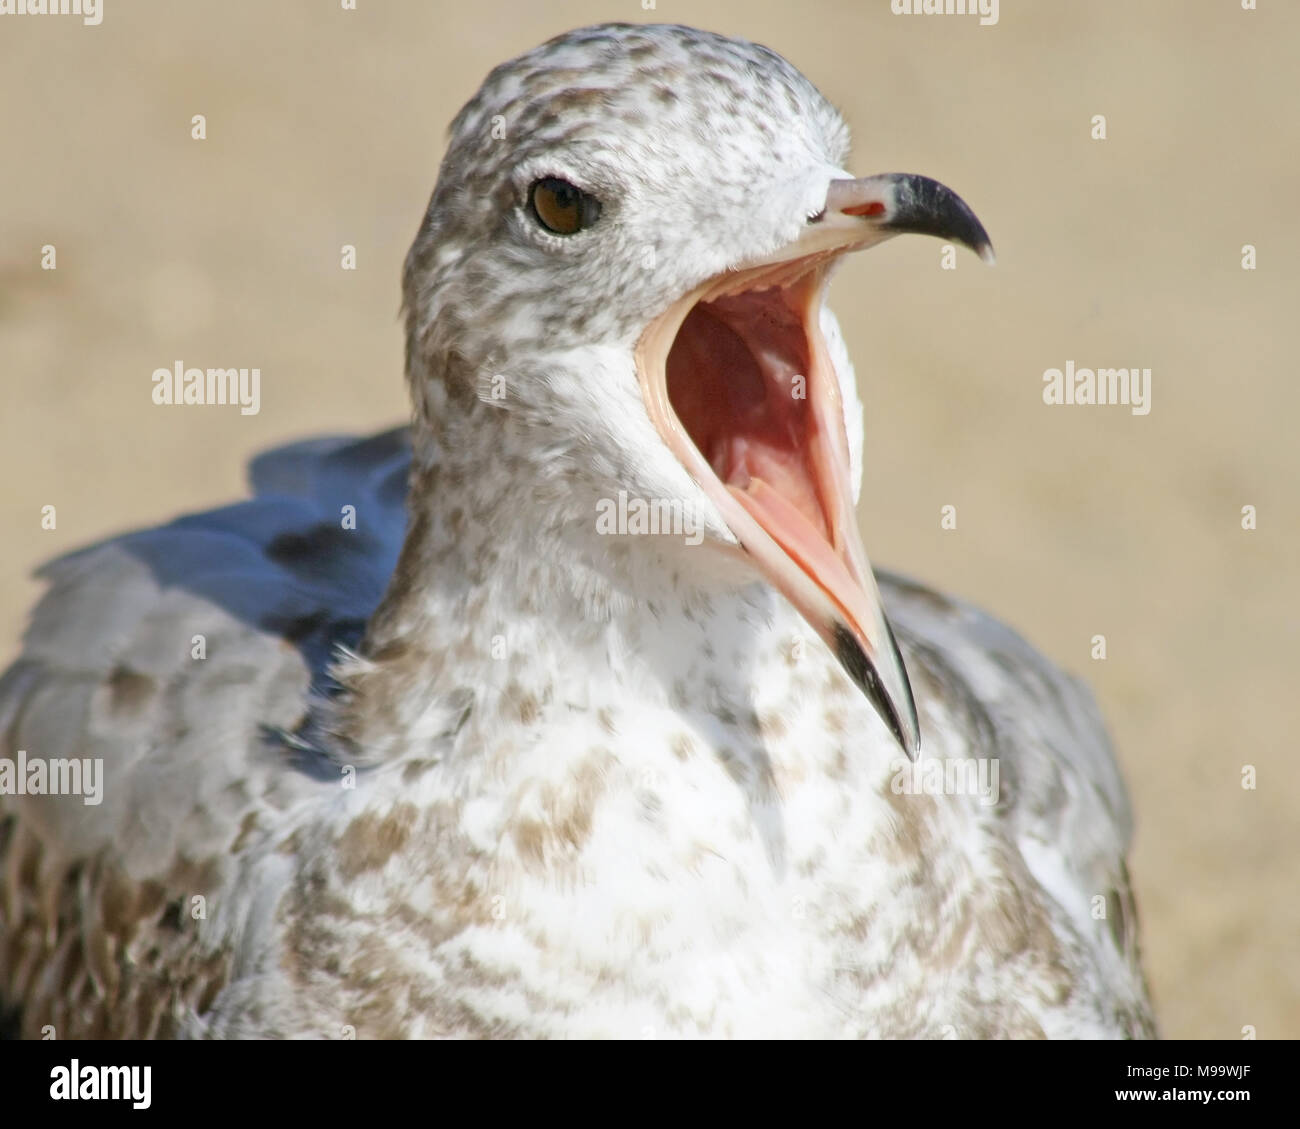 Seagull squawking very loud with its beak wide open Stock Photo